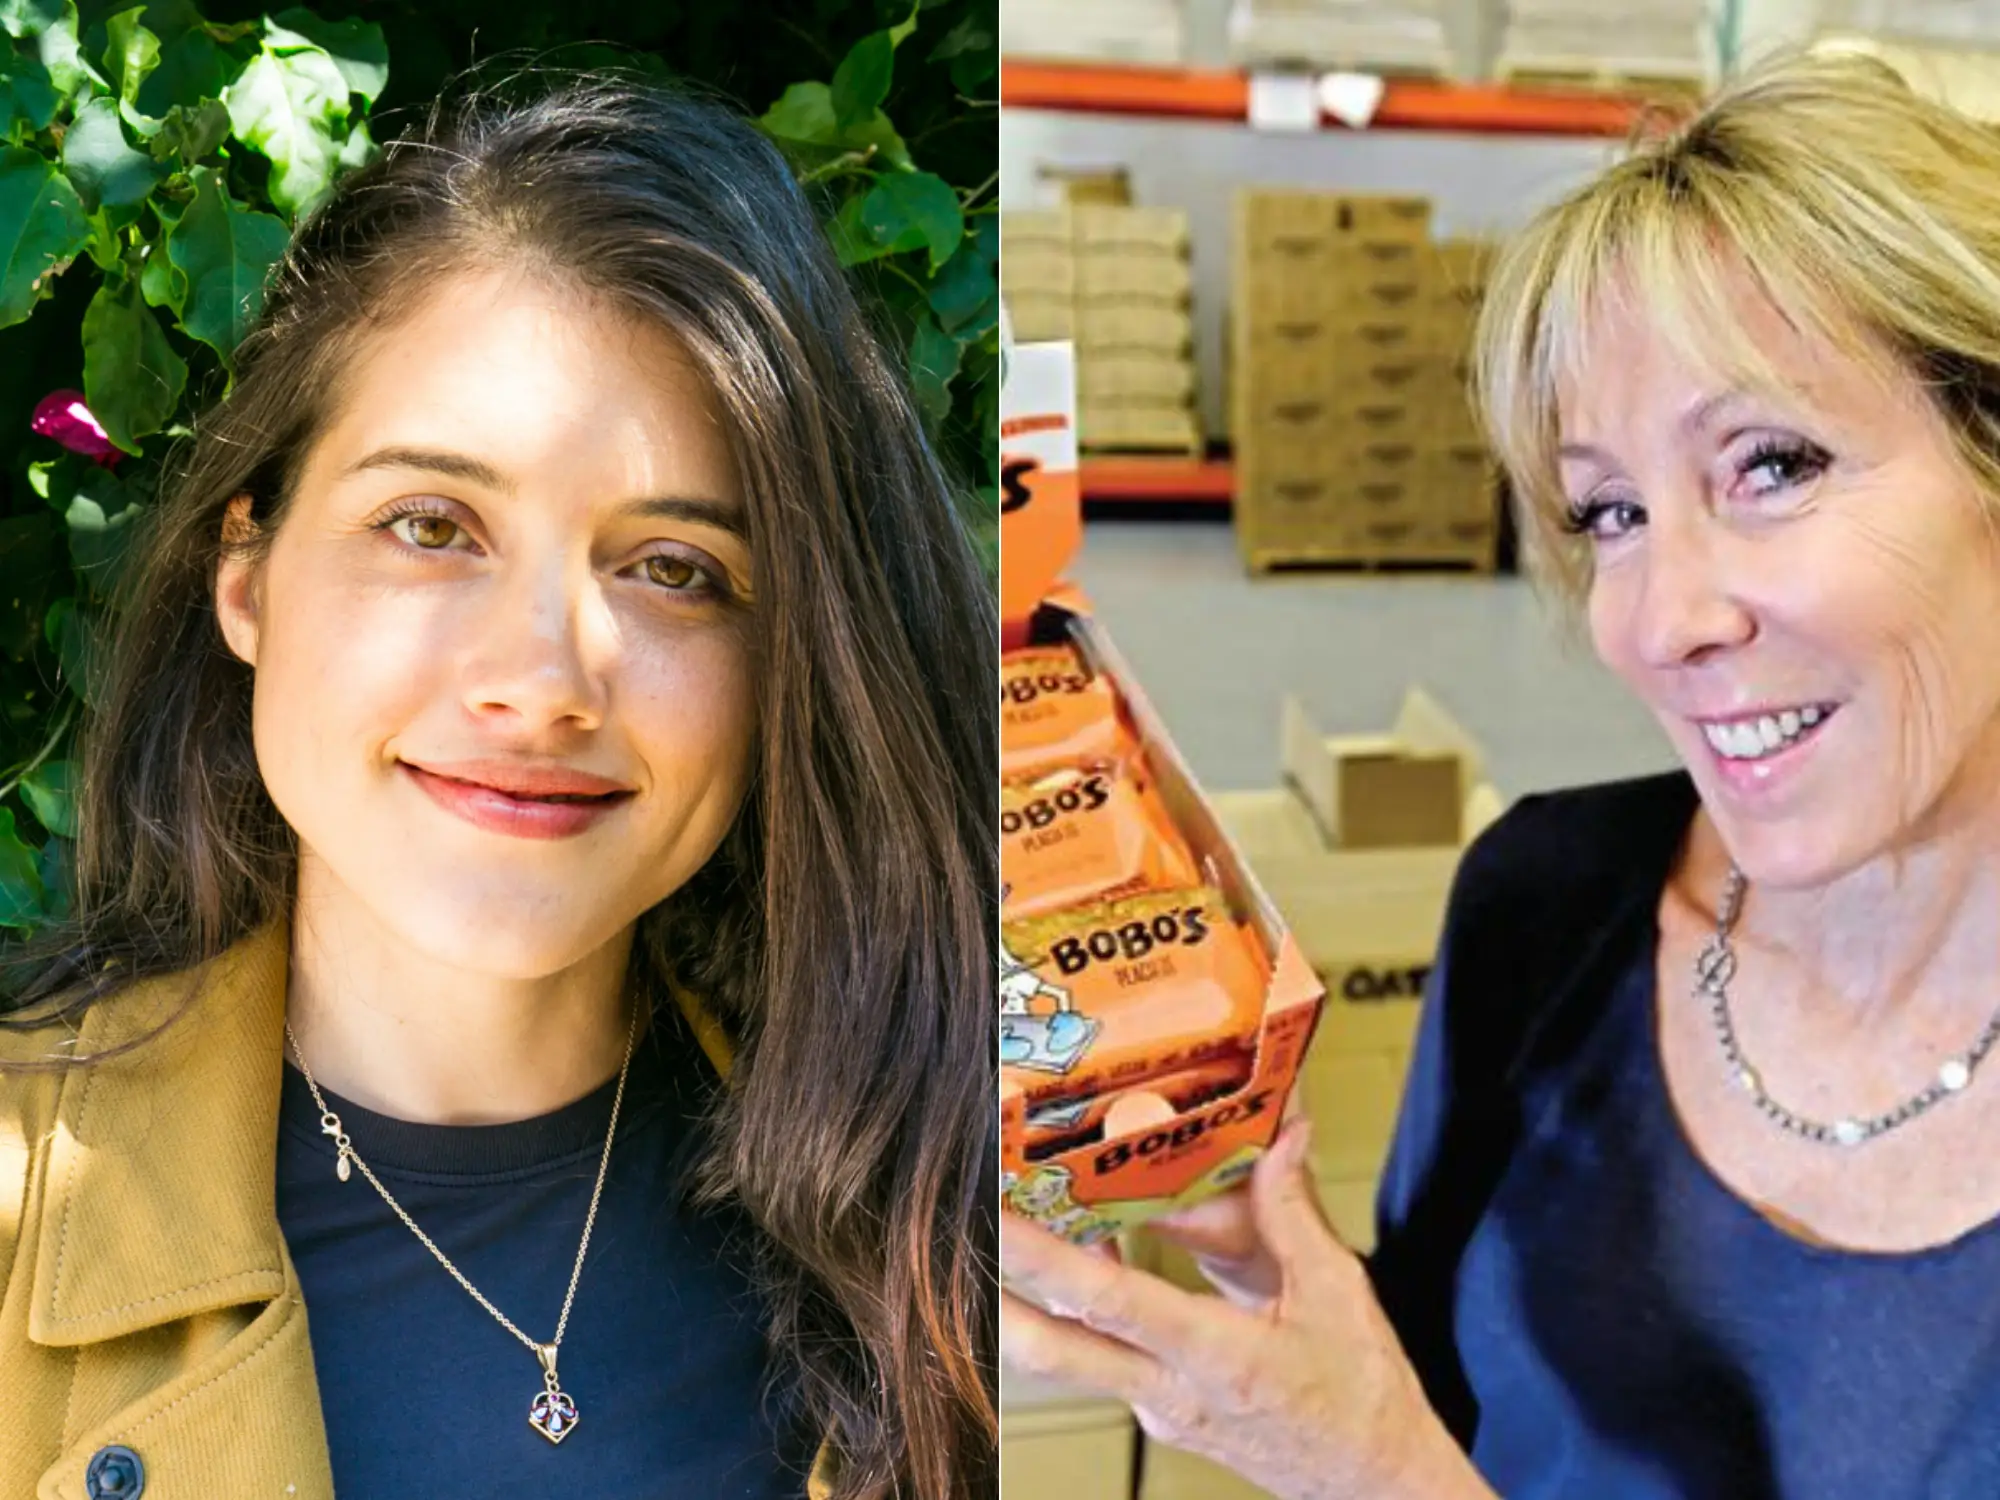 2 women entrepreneurs — one in tech, one in food — reveal what worked in getting investors on board and raising millions for their businesses